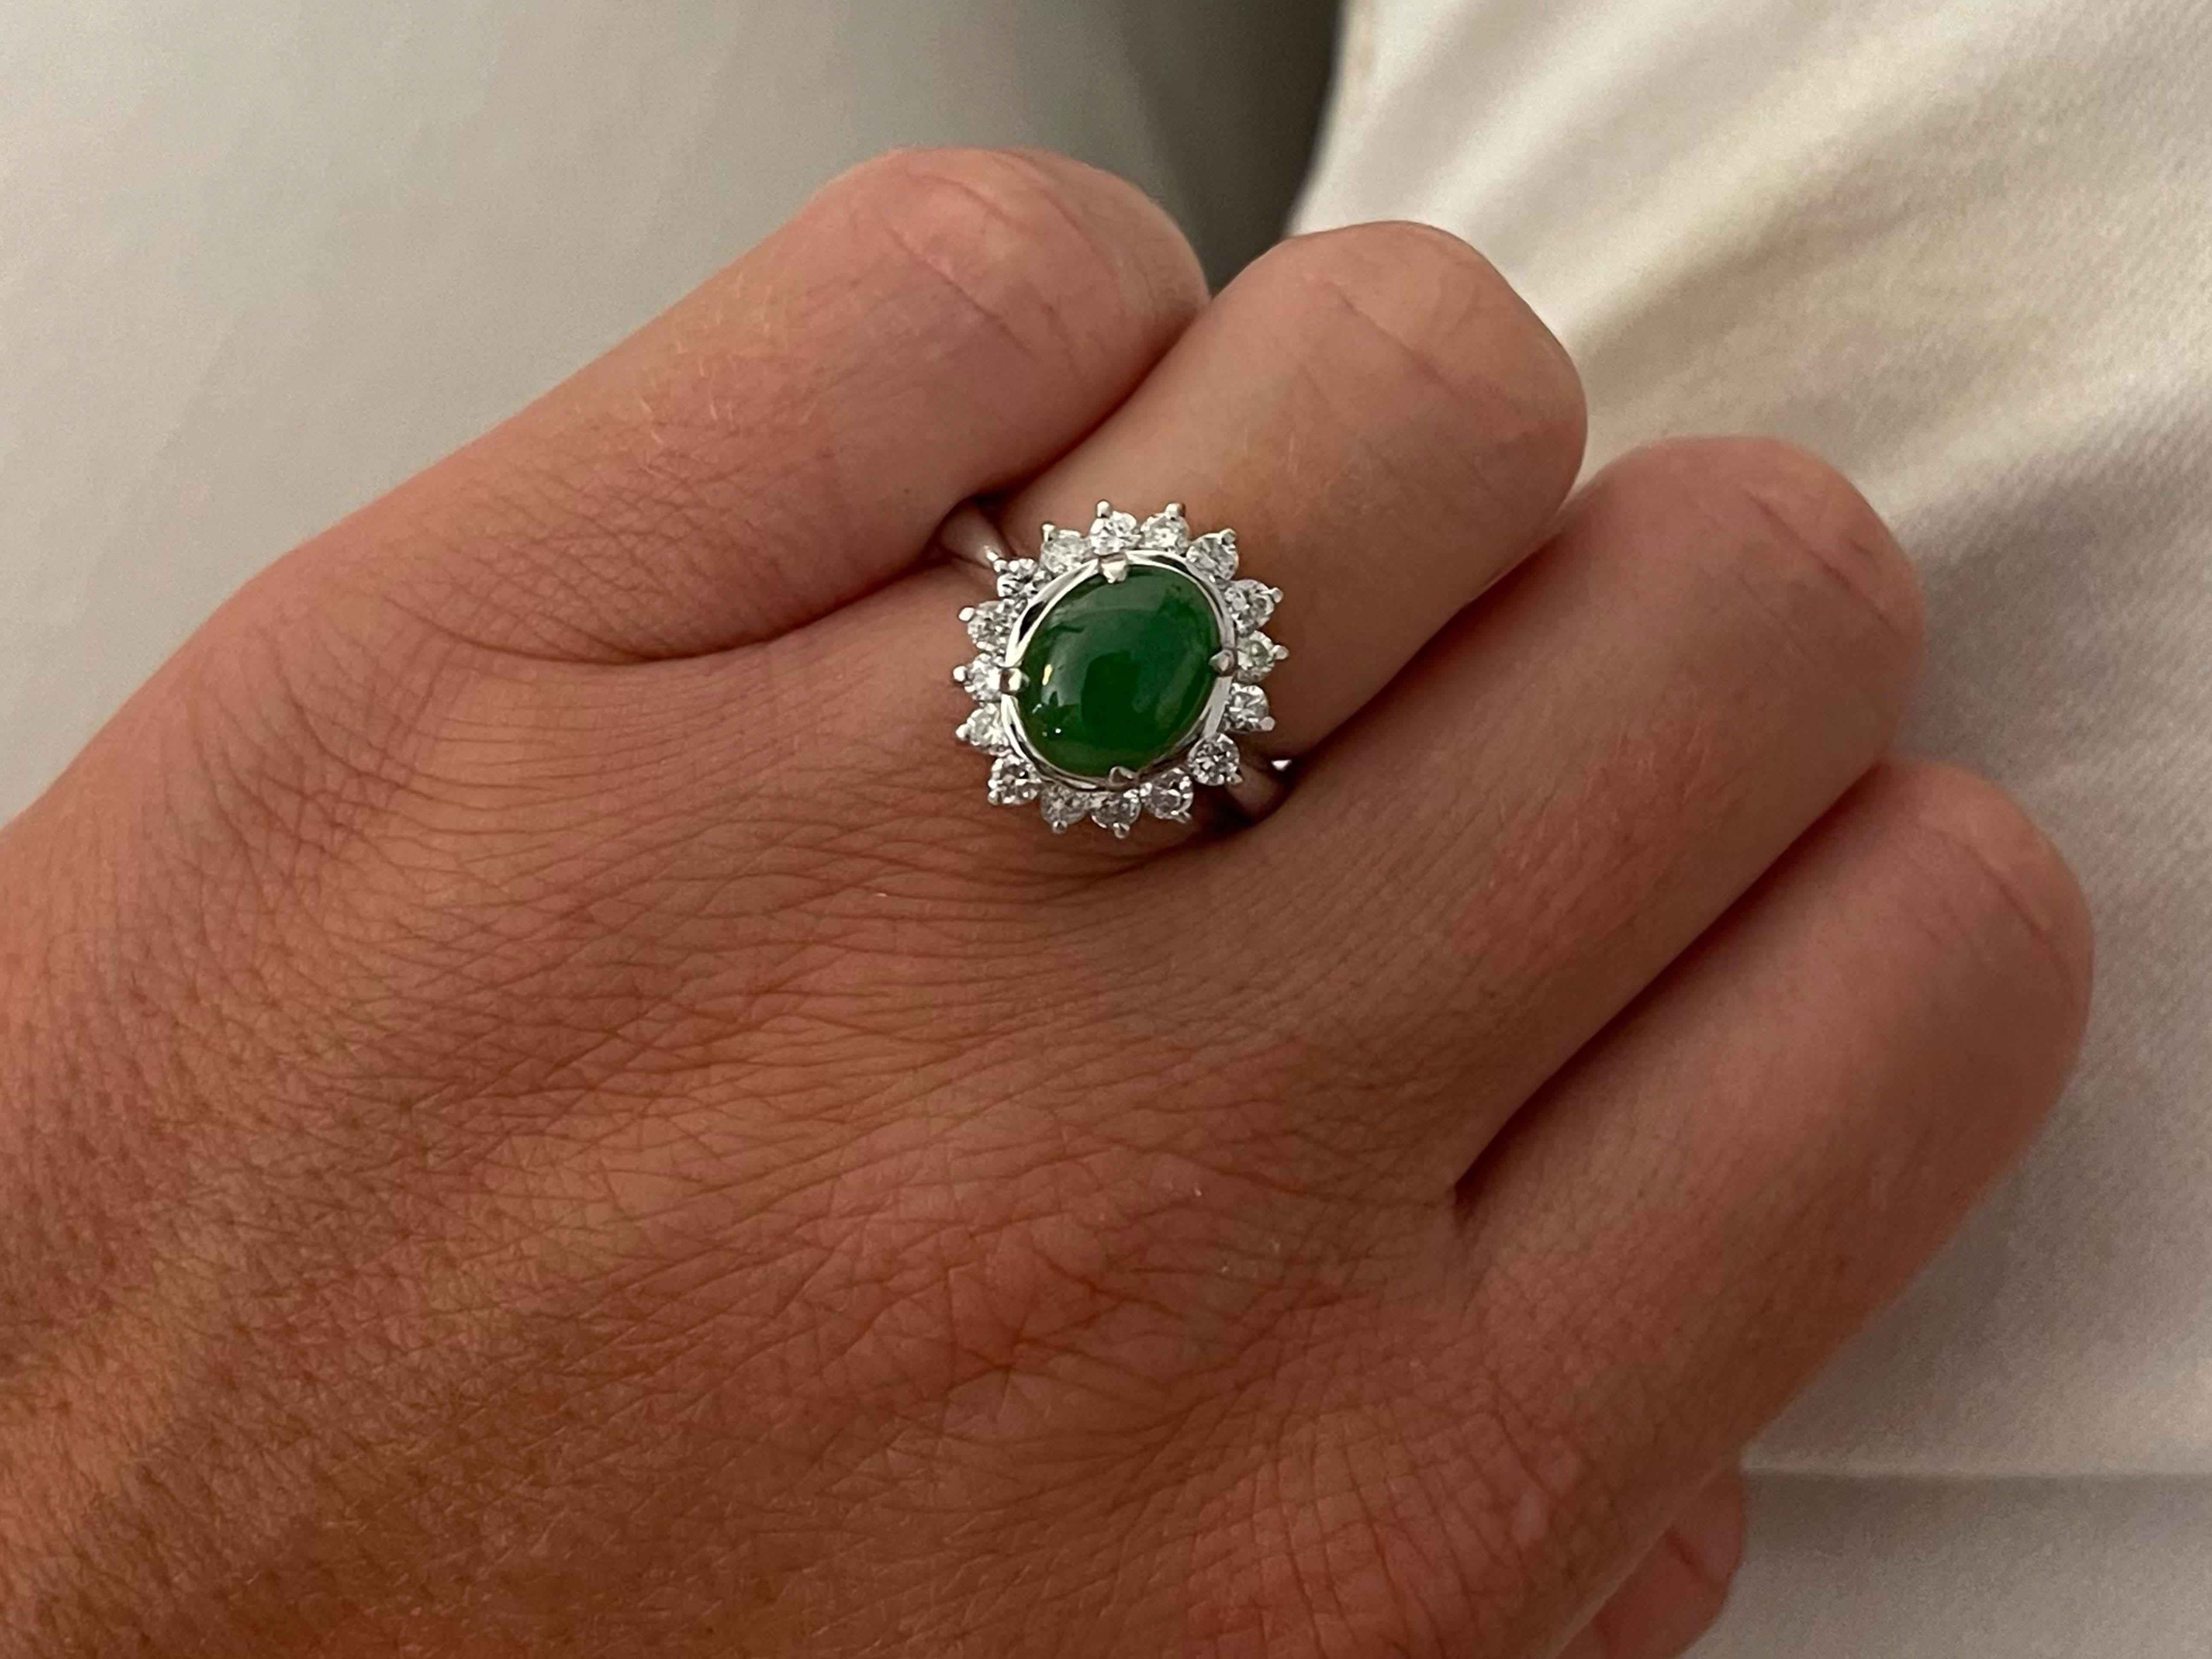 Item Specifications:

Metal: Platinum

Style: Statement Ring

Ring Size: 6 (resizing available for a fee)

Total Weight: 8.60 Grams

Gemstone Specifications:

Center Gemstone: Jadeite Jade

Shape: Oval

Color: Green

Cut: Cabochon 

Gemstone Weight: